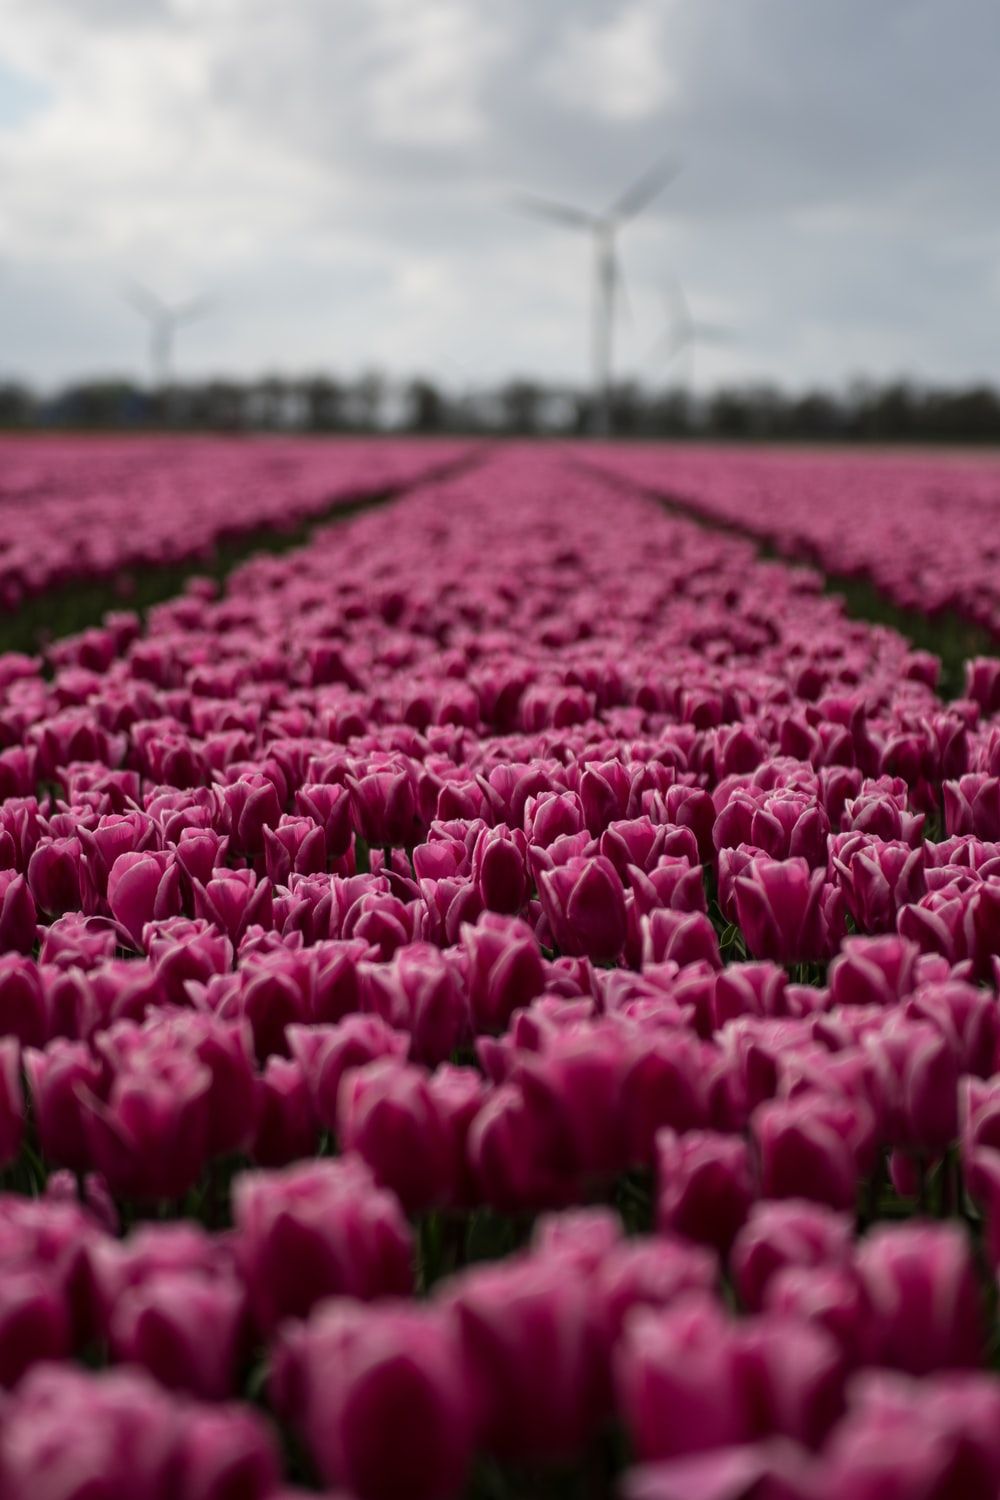 Dutch Tulip Field Picture. Download Free Image